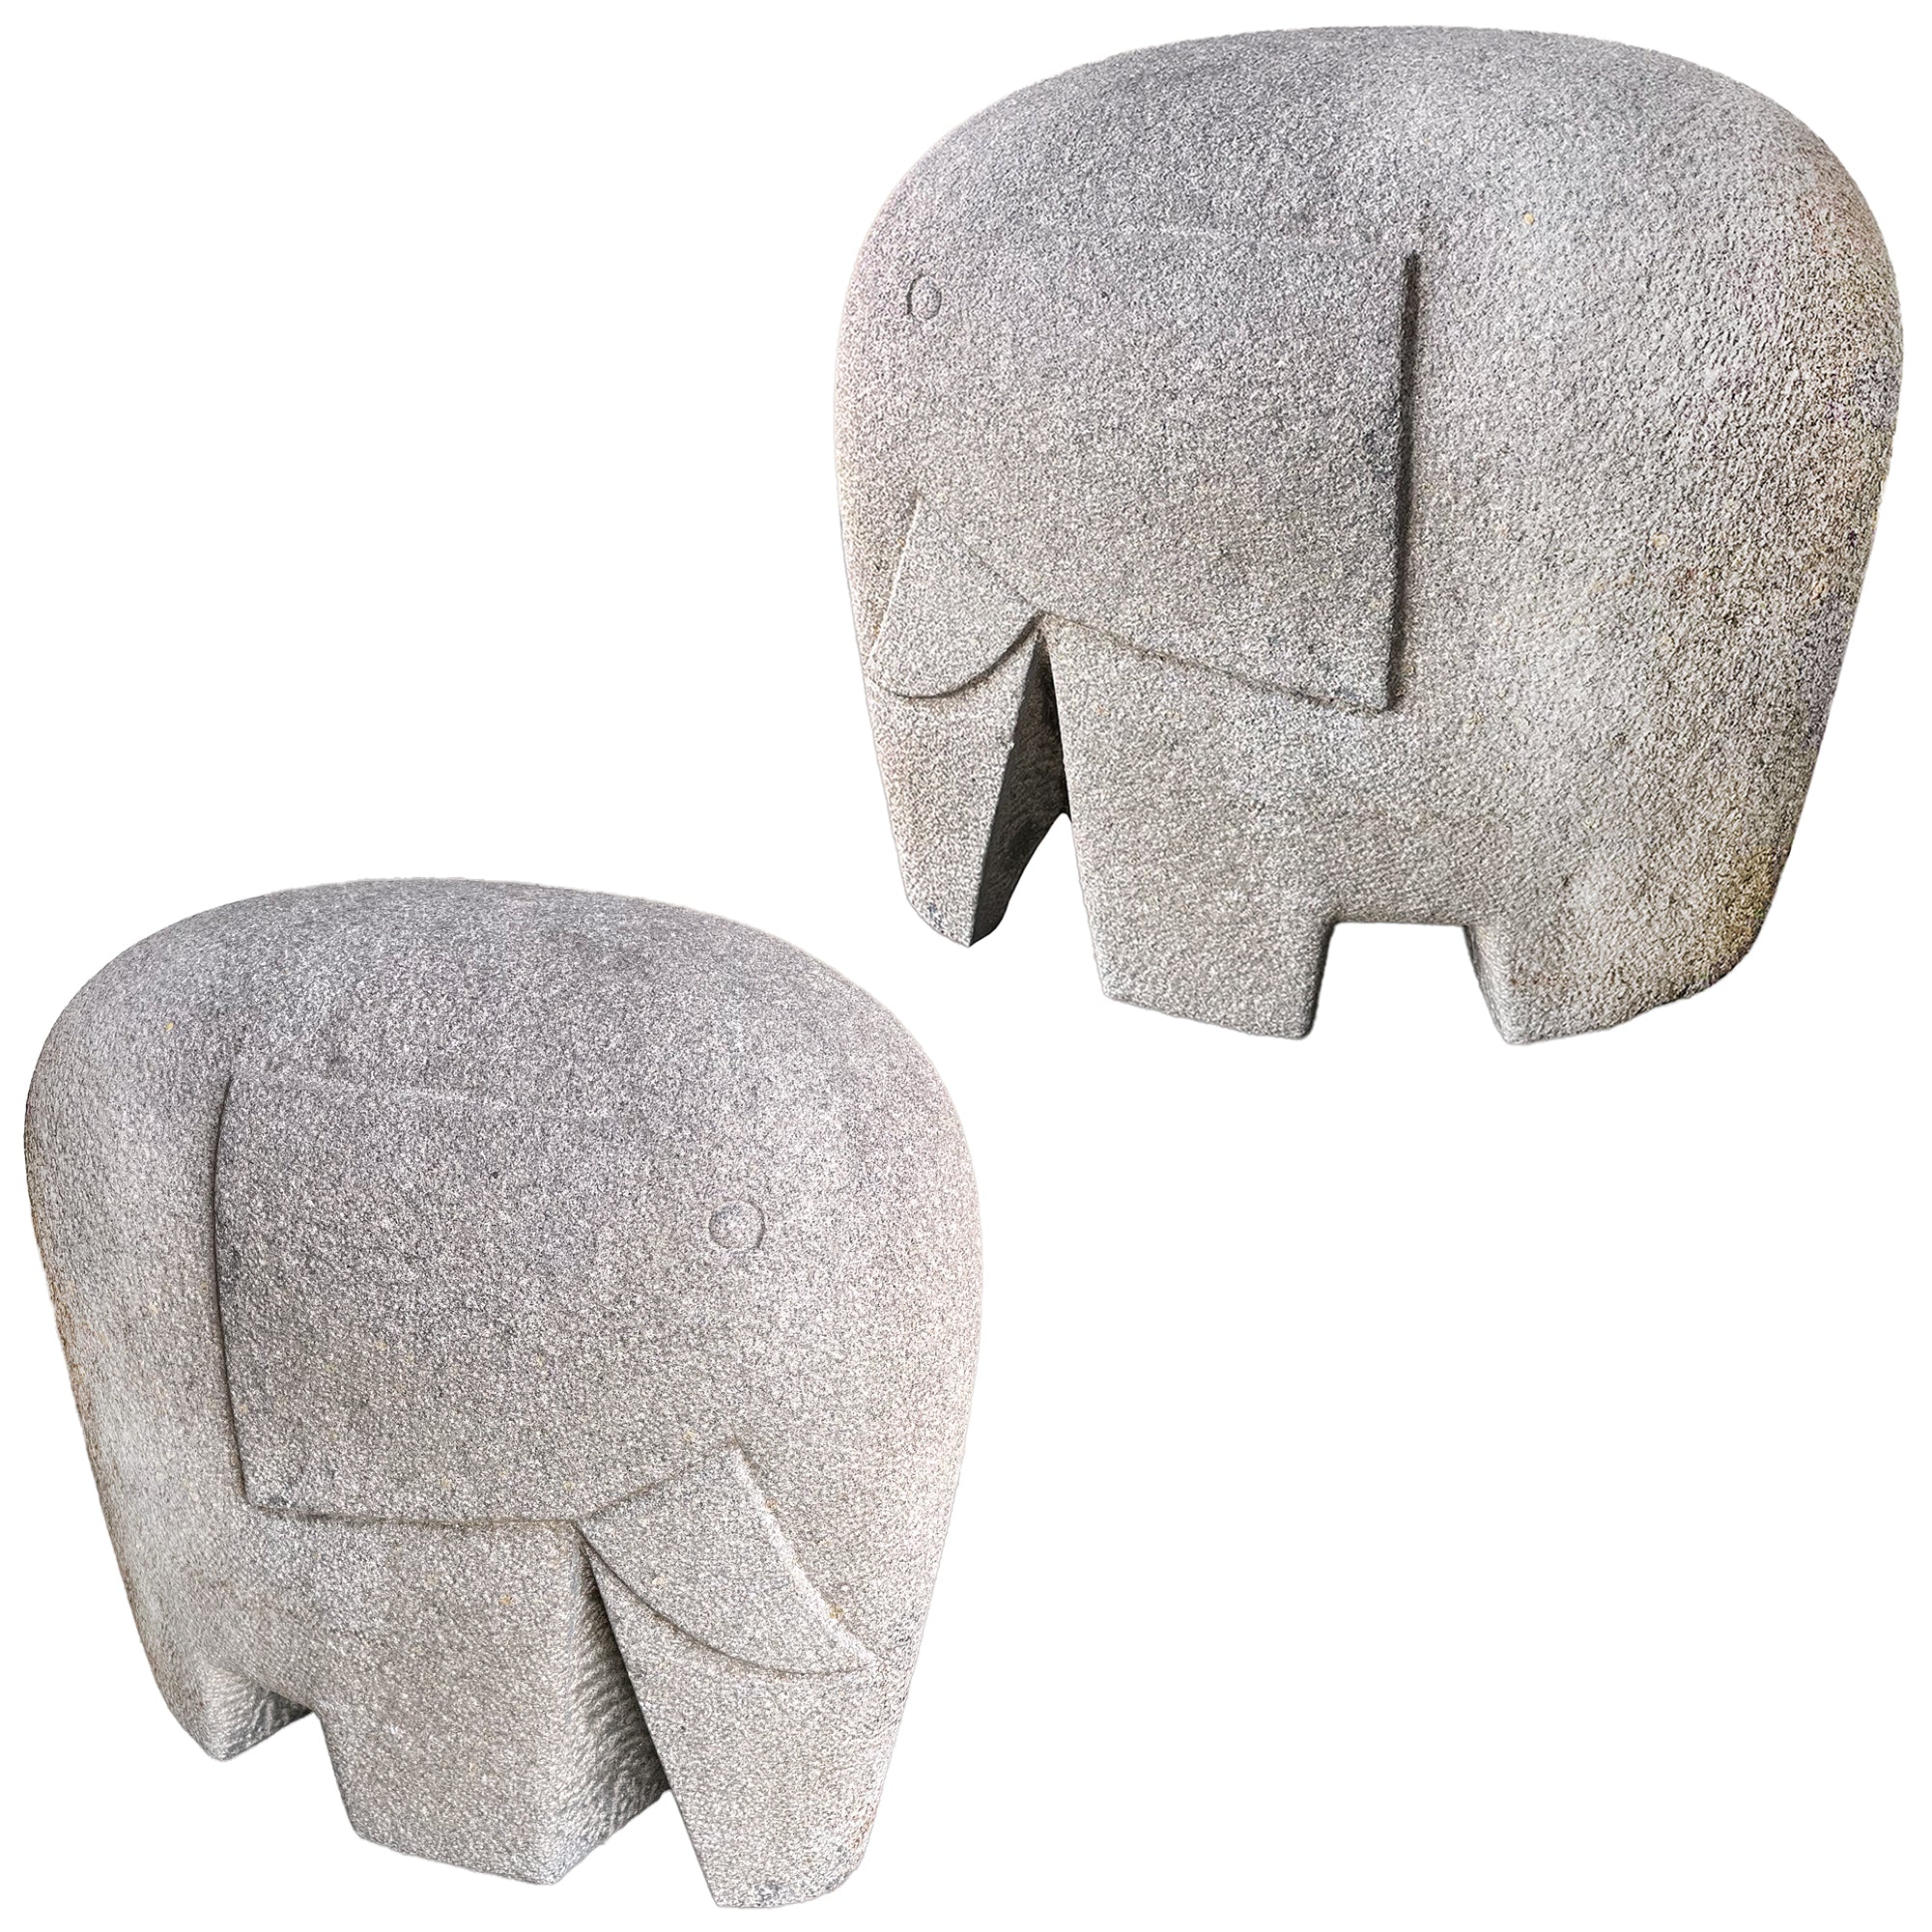 Pair of Modernist Carved Granite Stylized Elephant Sculptures